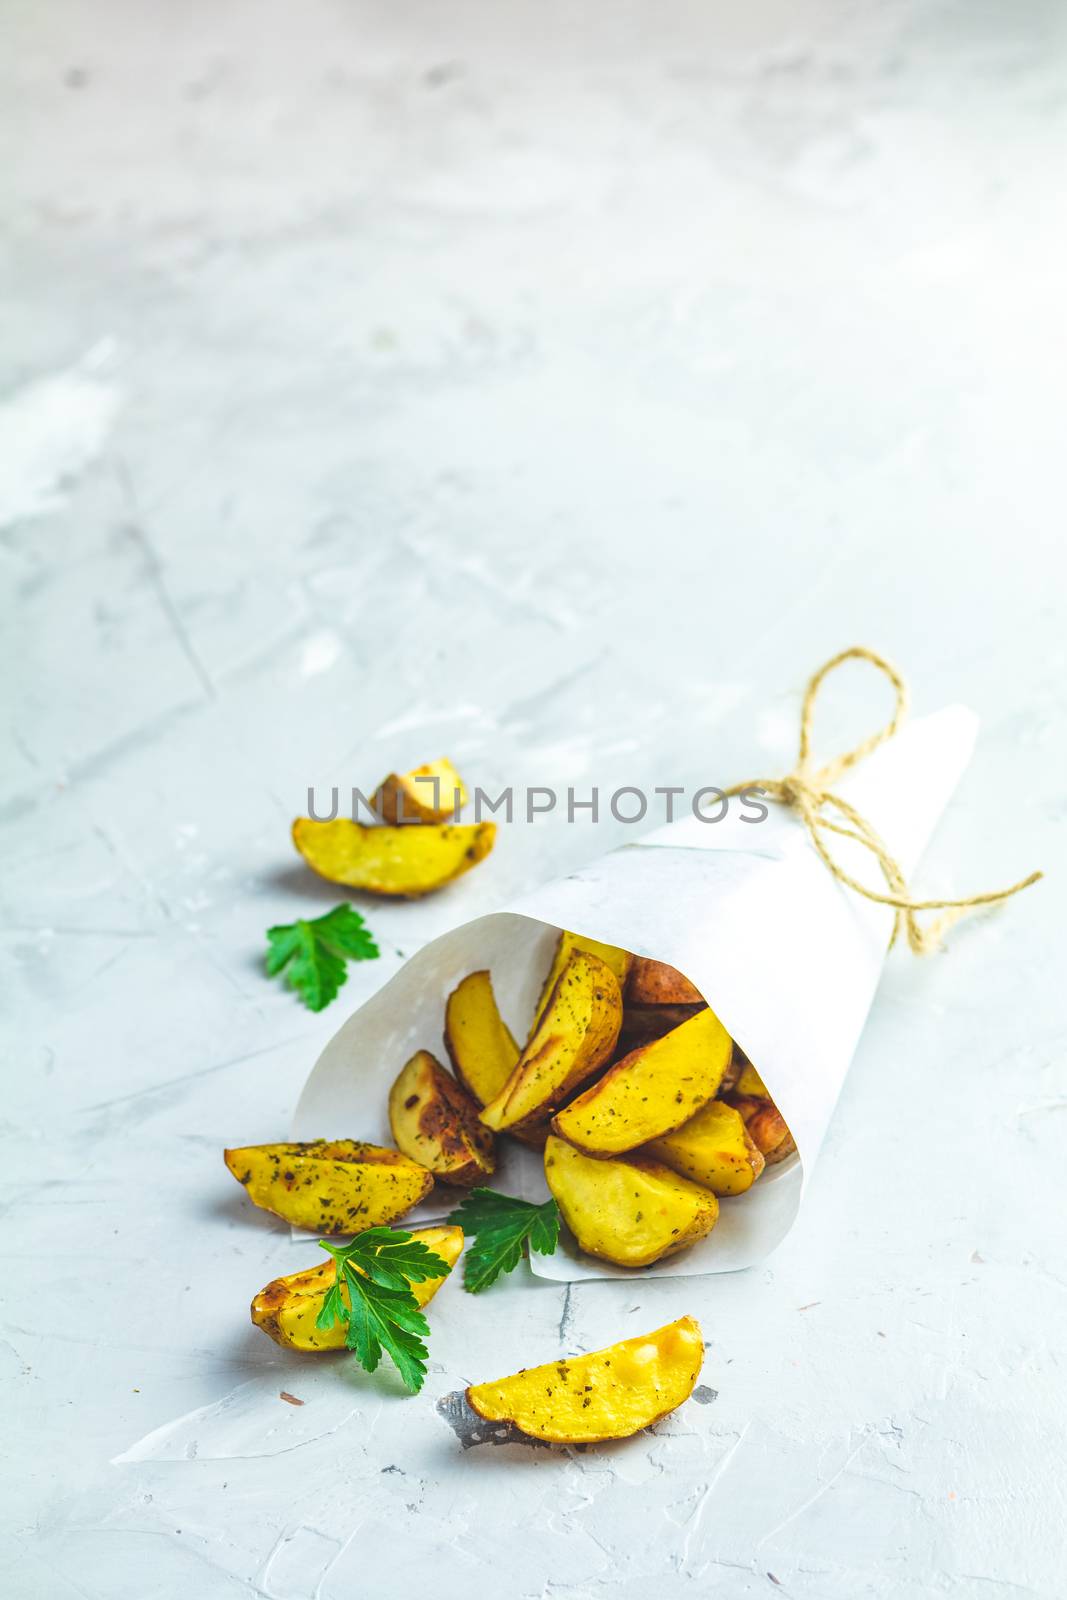 Baked potato wedges on paper with addition sea salt and parsley on a light gray concrete background